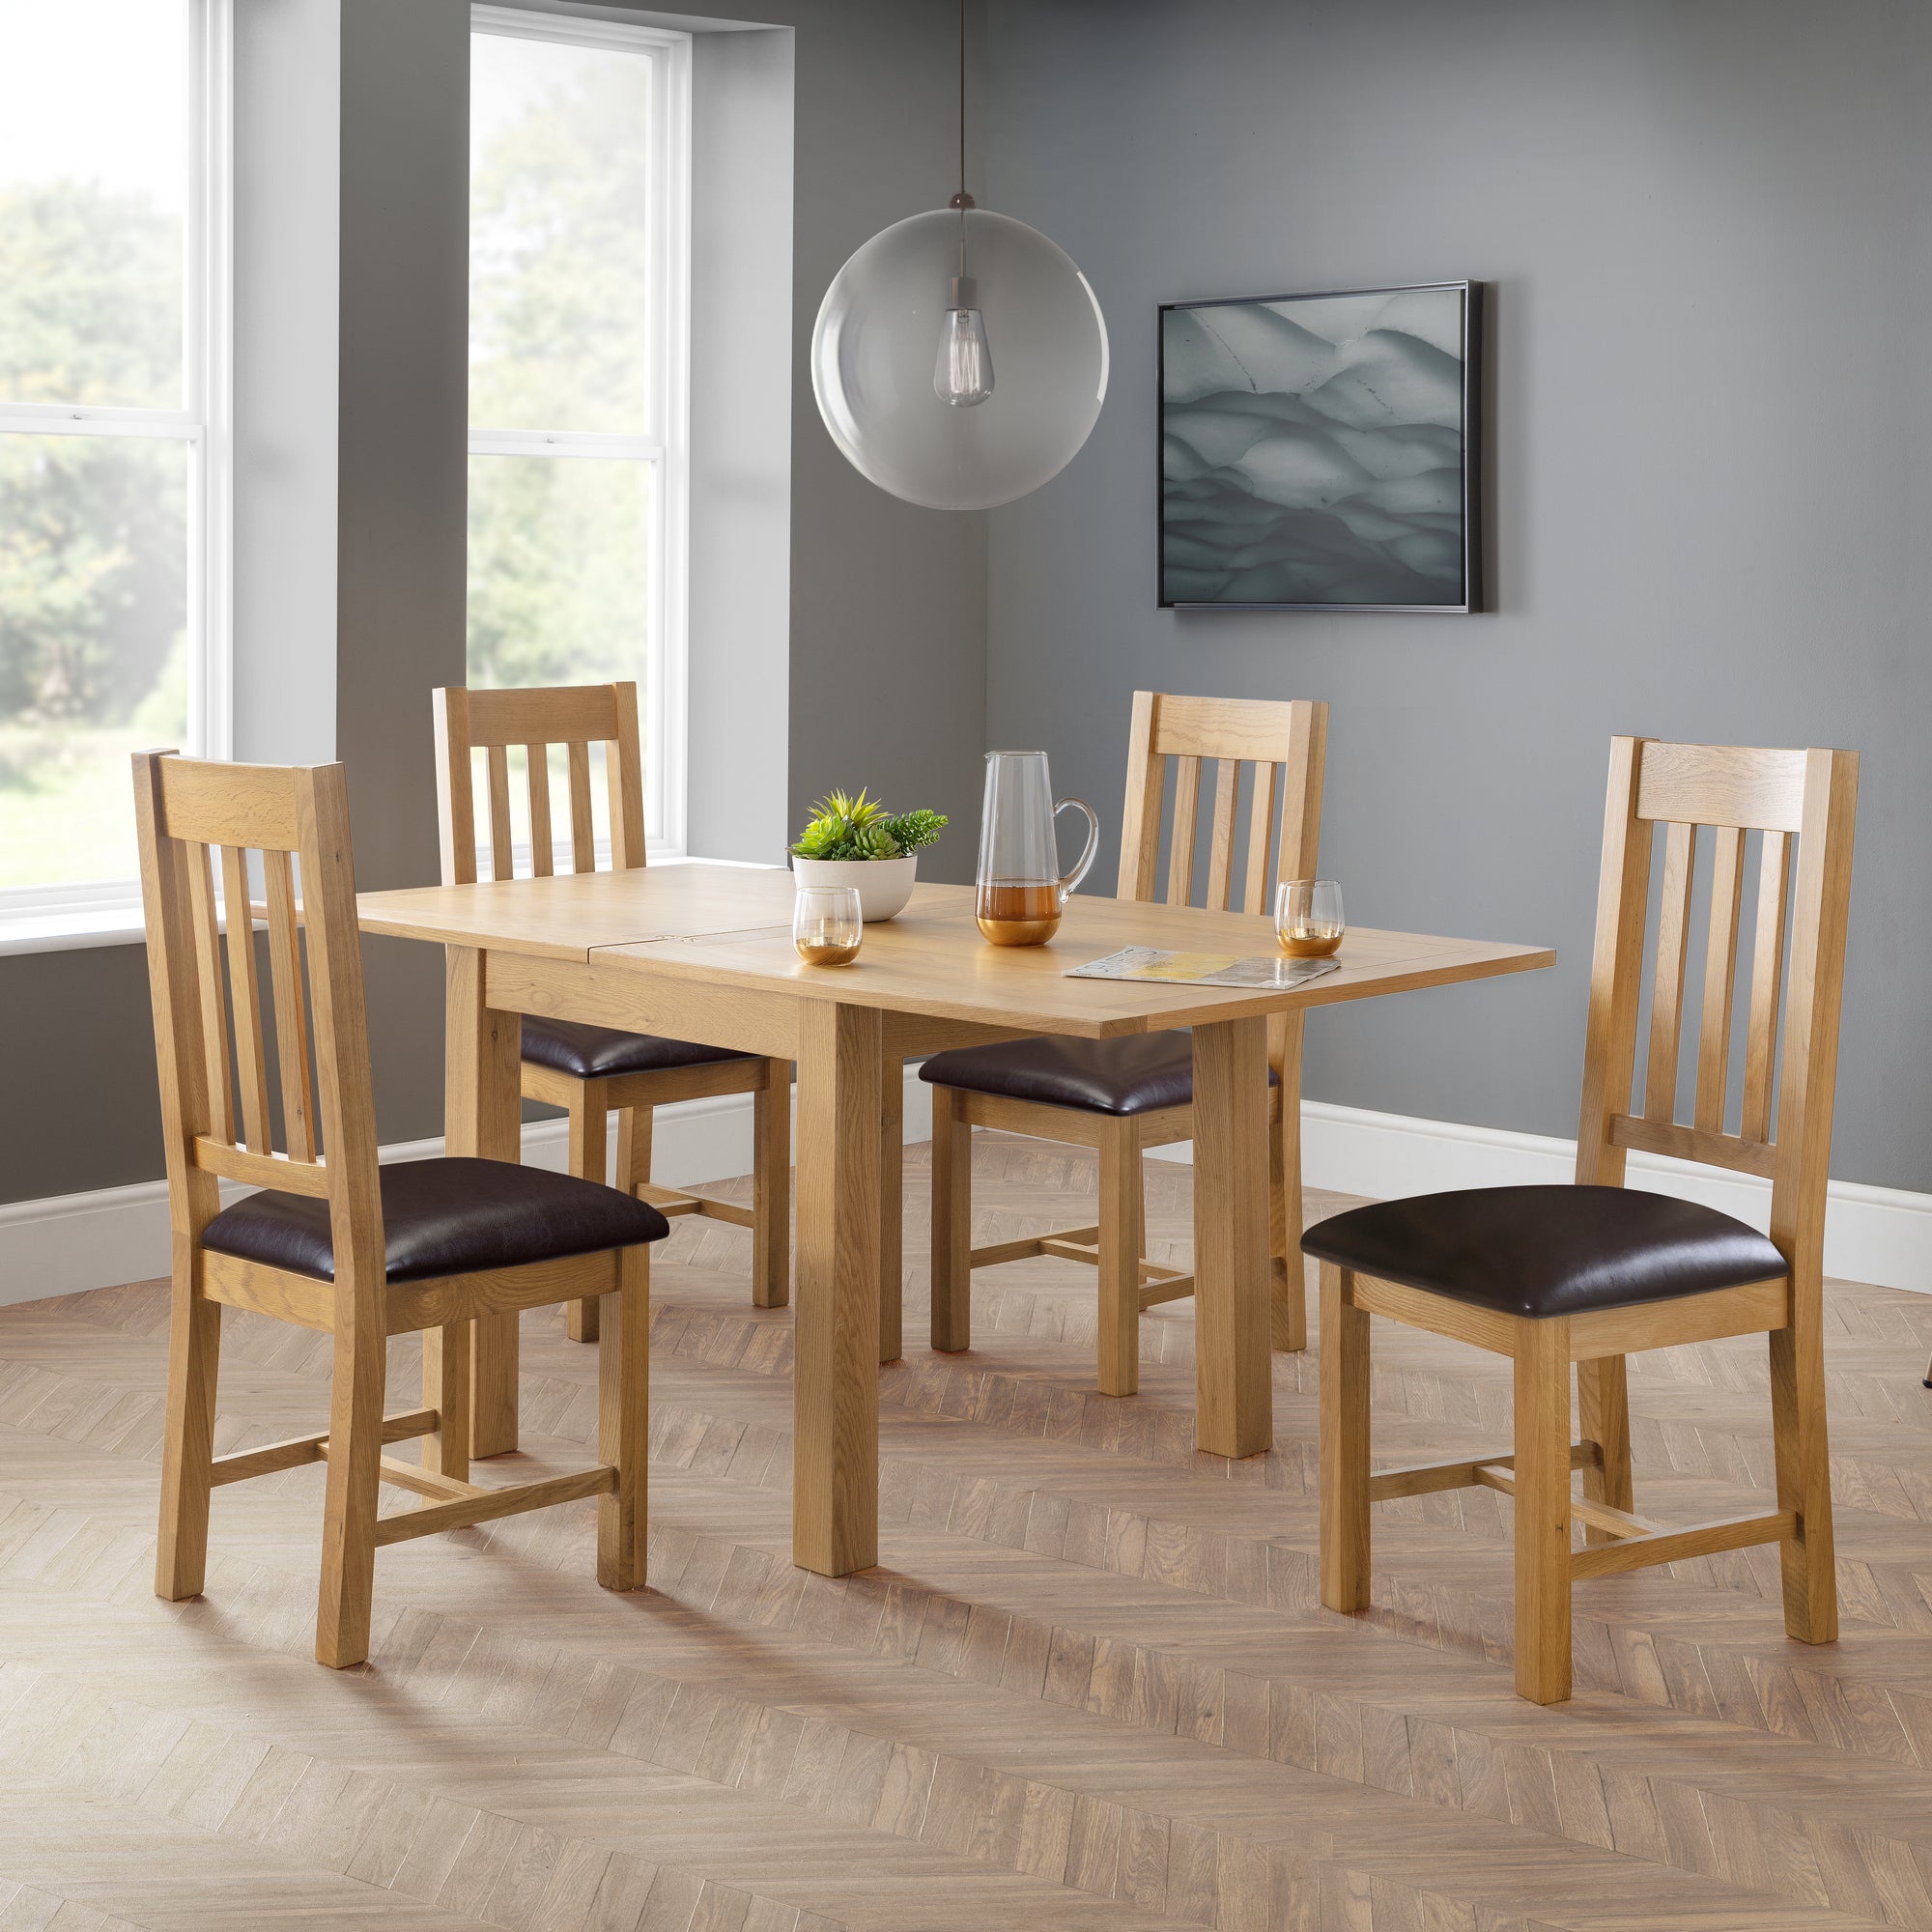 Astoria Square Flip Top Dining Table With 4 Chairs Solid Oak Light Oak